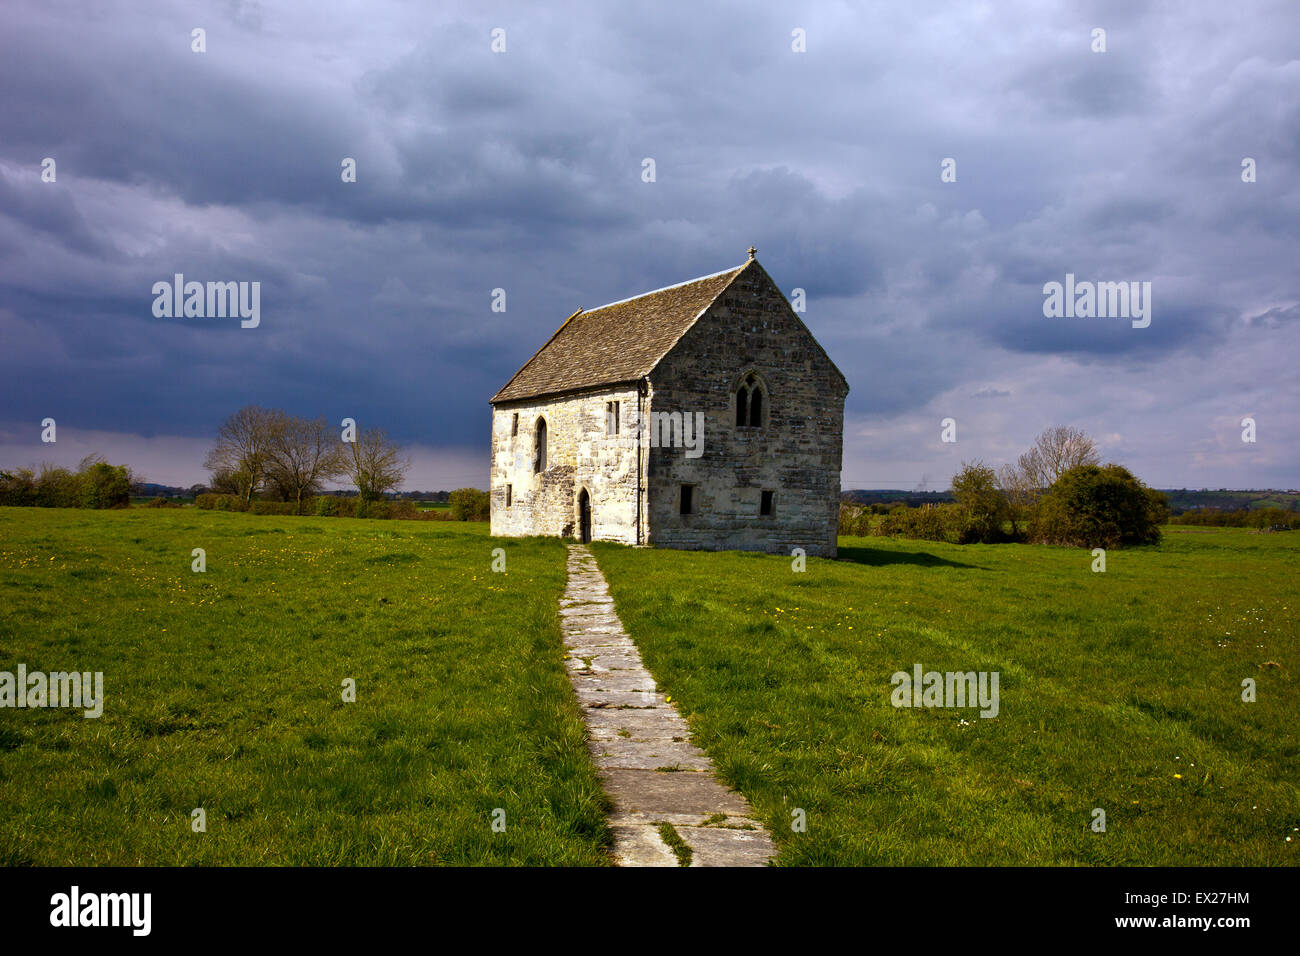 The historic Abbots Fish House in Meare on the Somerset levels, England, UK Stock Photo